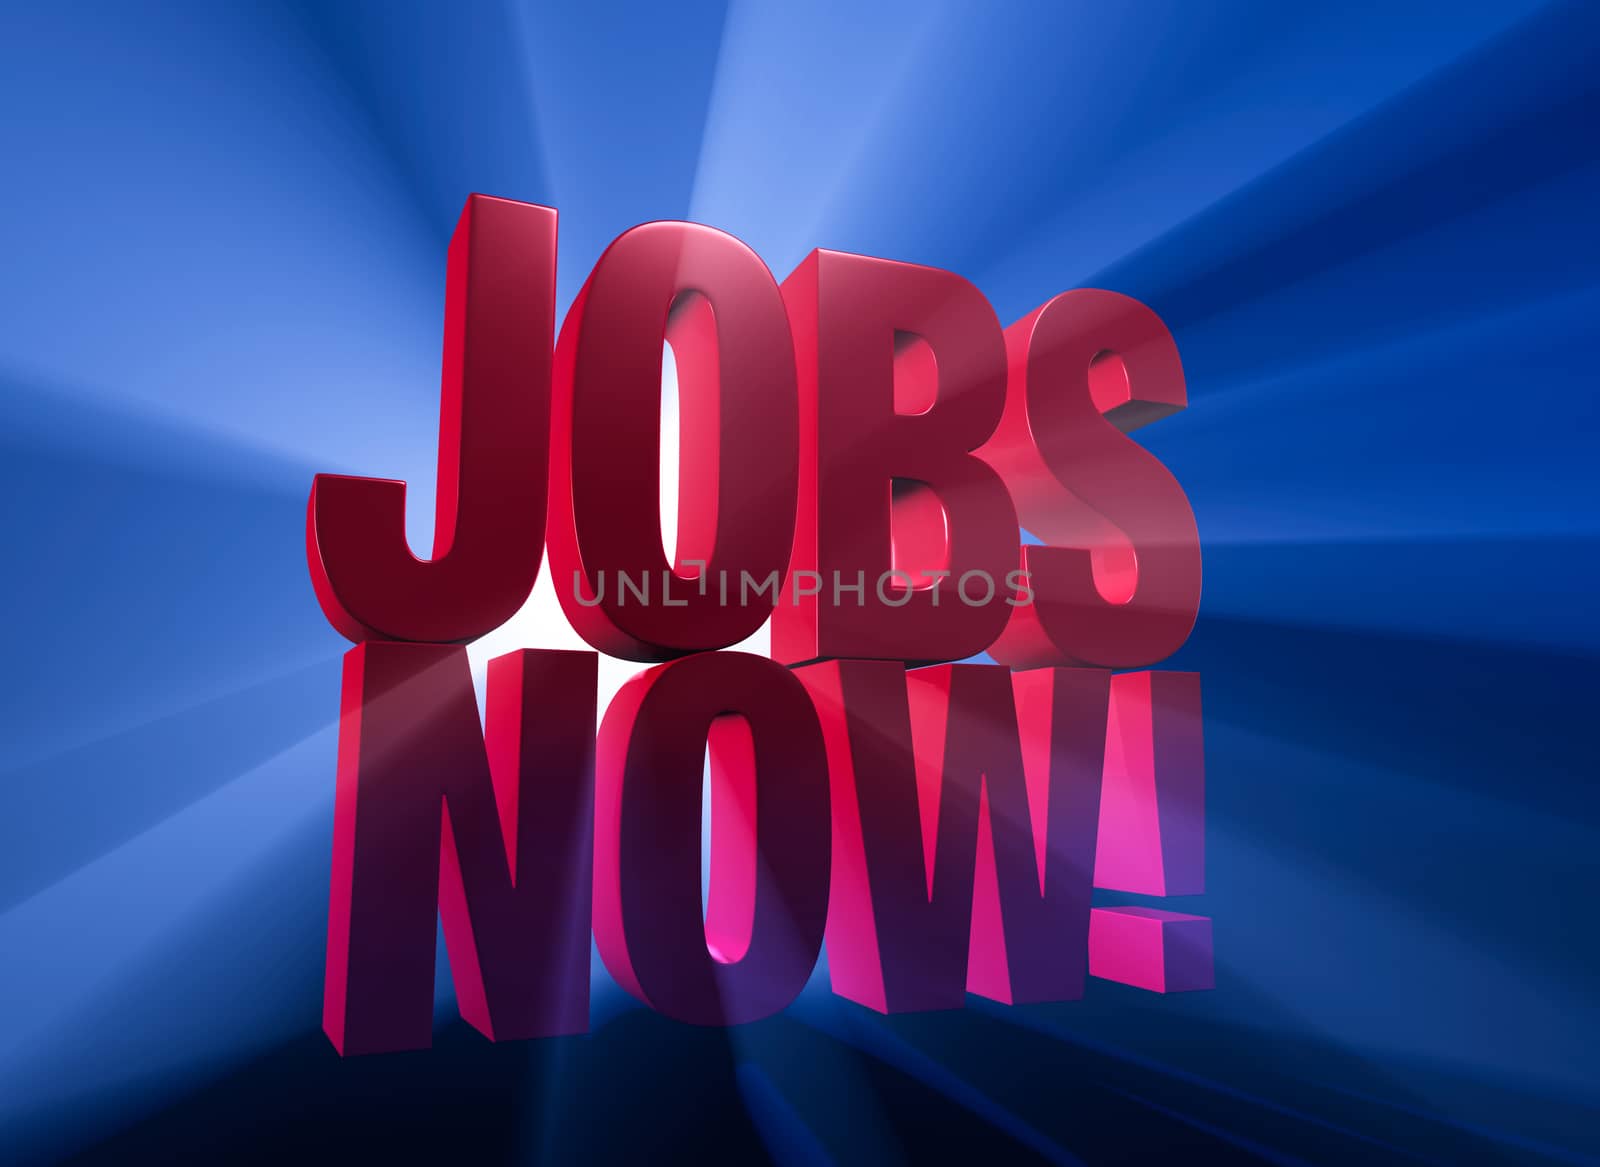 Bold, red "JOBS NOW!" on dark blue background brilliantly backlight with light rays shining through.